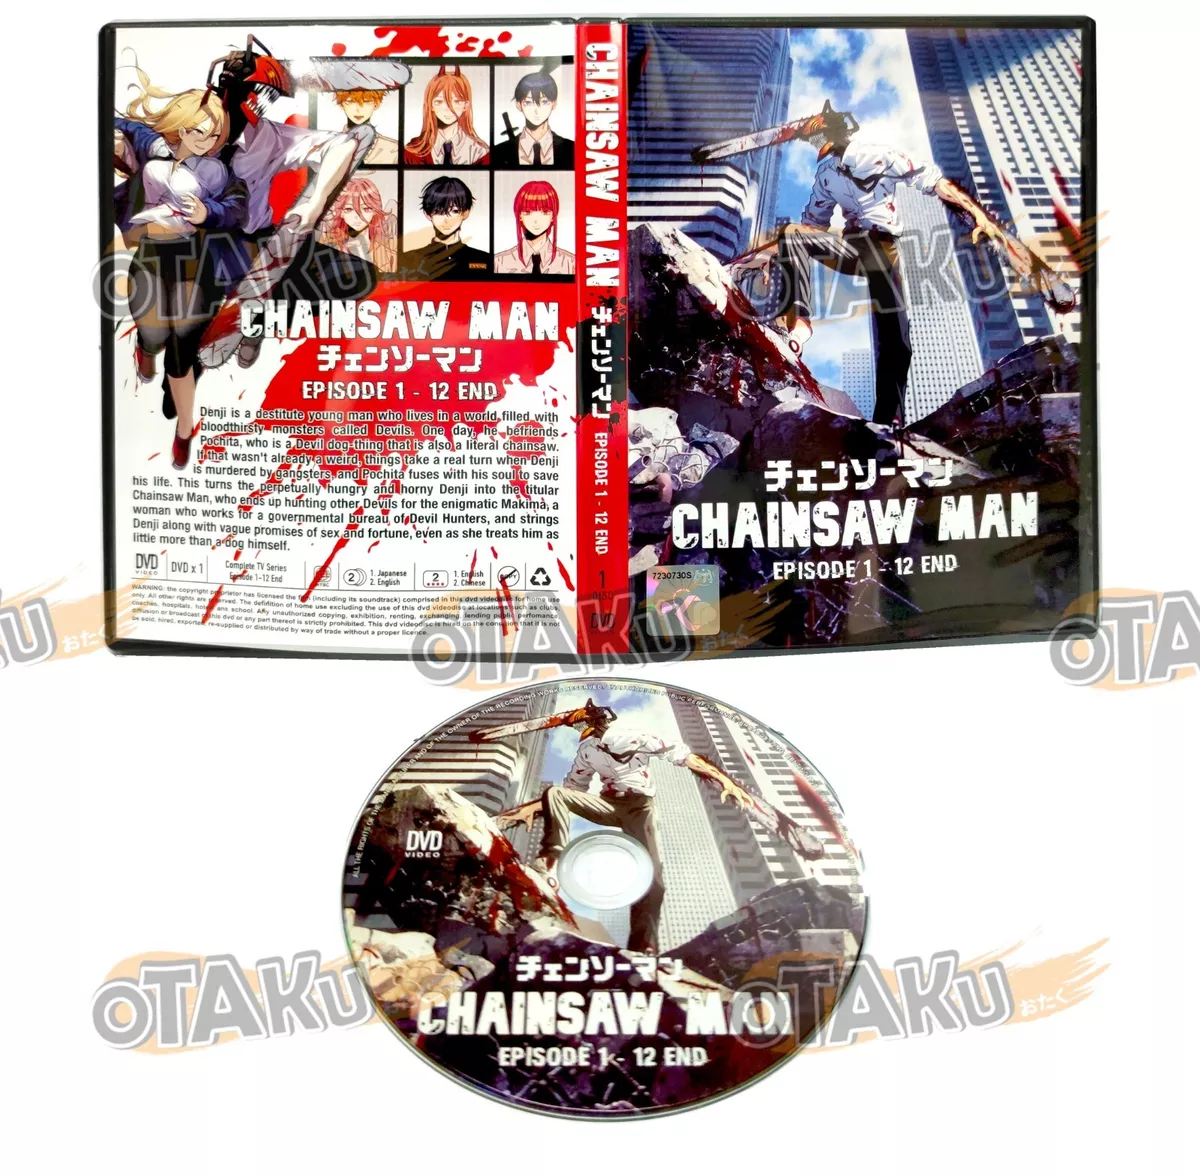 Chainsaw Man Episode 7 English Dub Release Date and Time on